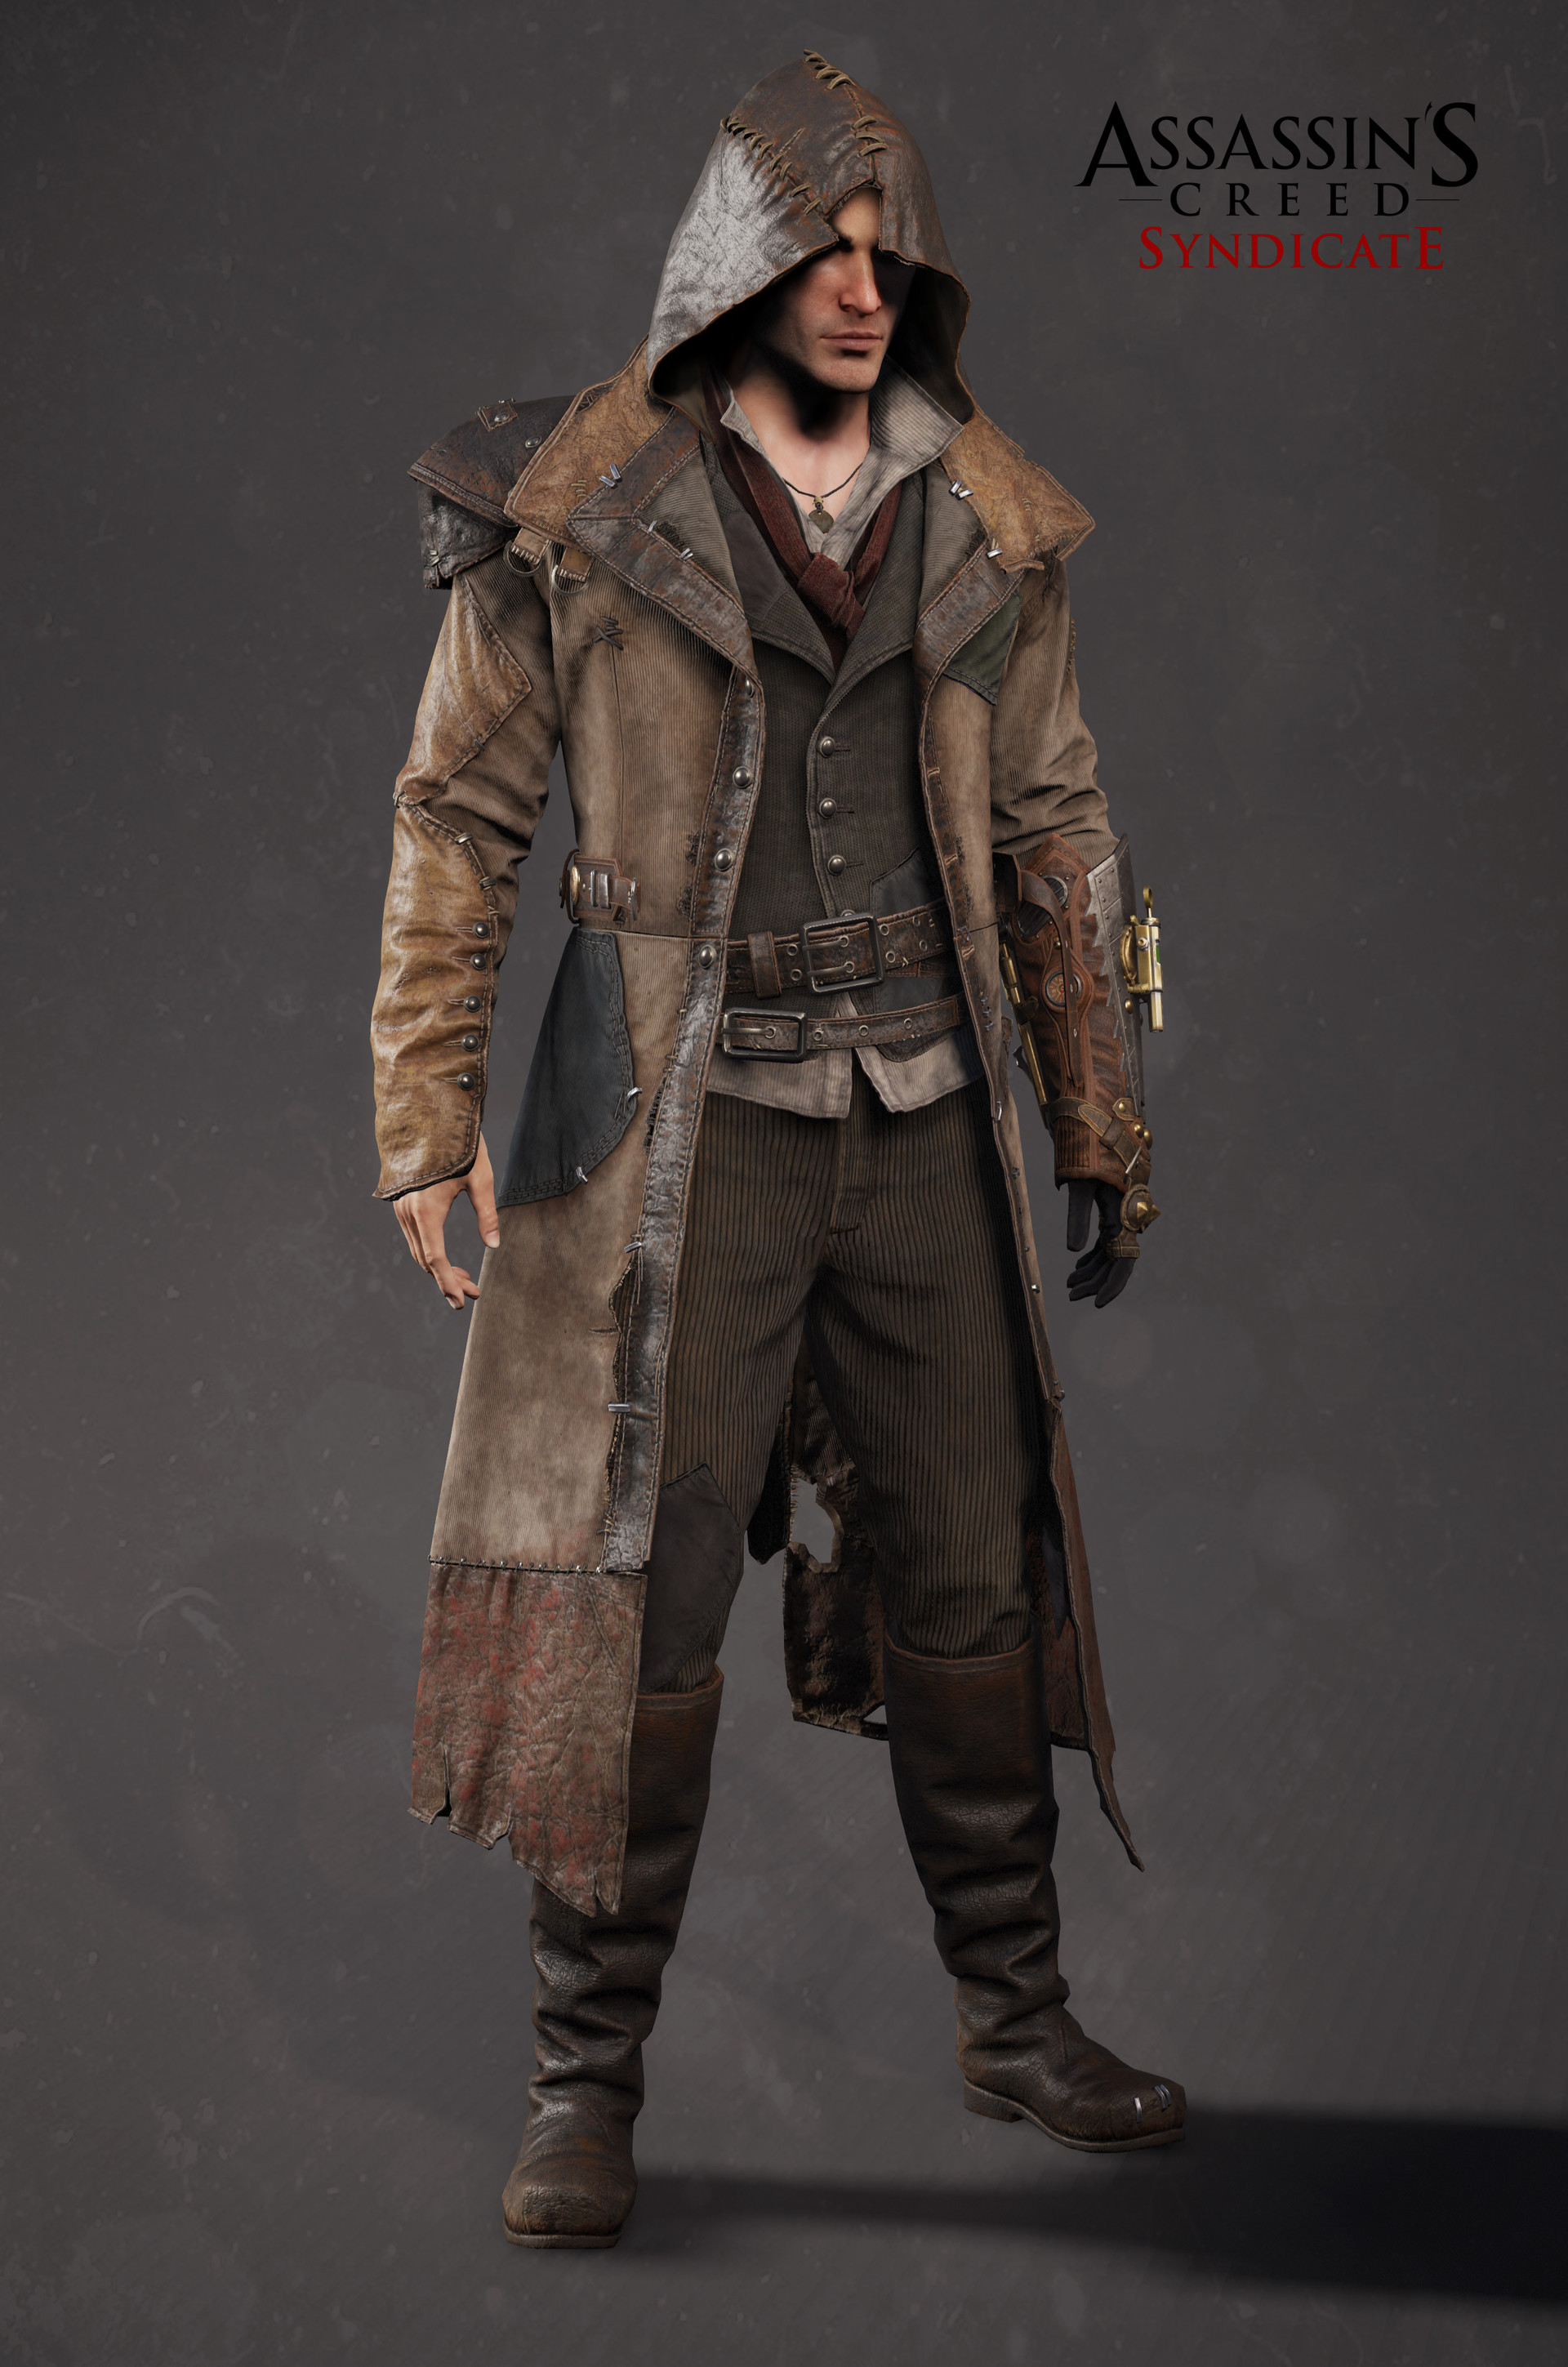 Assassin's Creed Syndicate - Jacob's Frankeinstein DLC outfit.